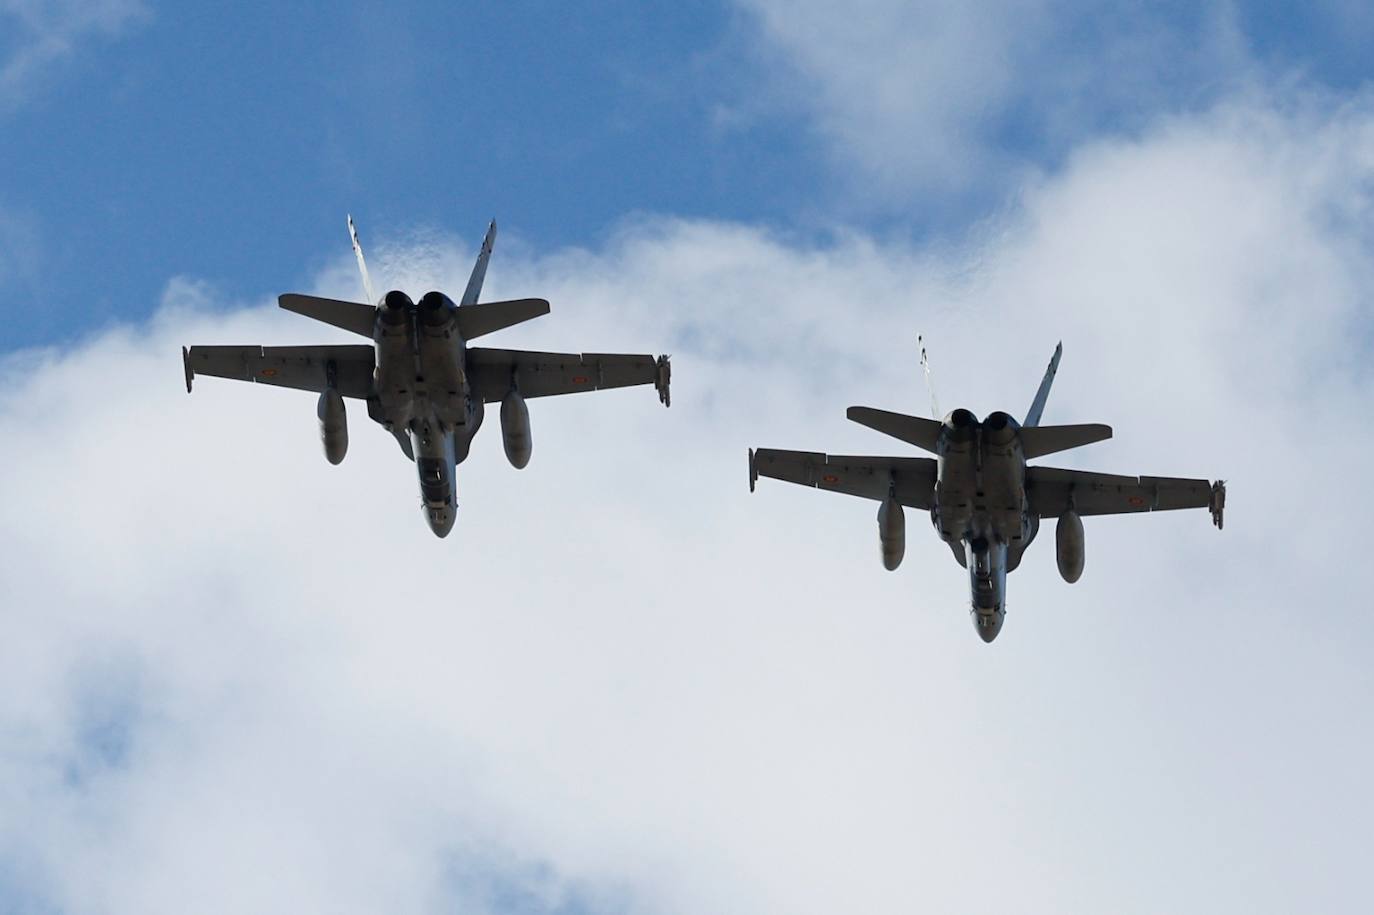 F-18 fighters fly over the surroundings of the airport and the Bay of Malaga 